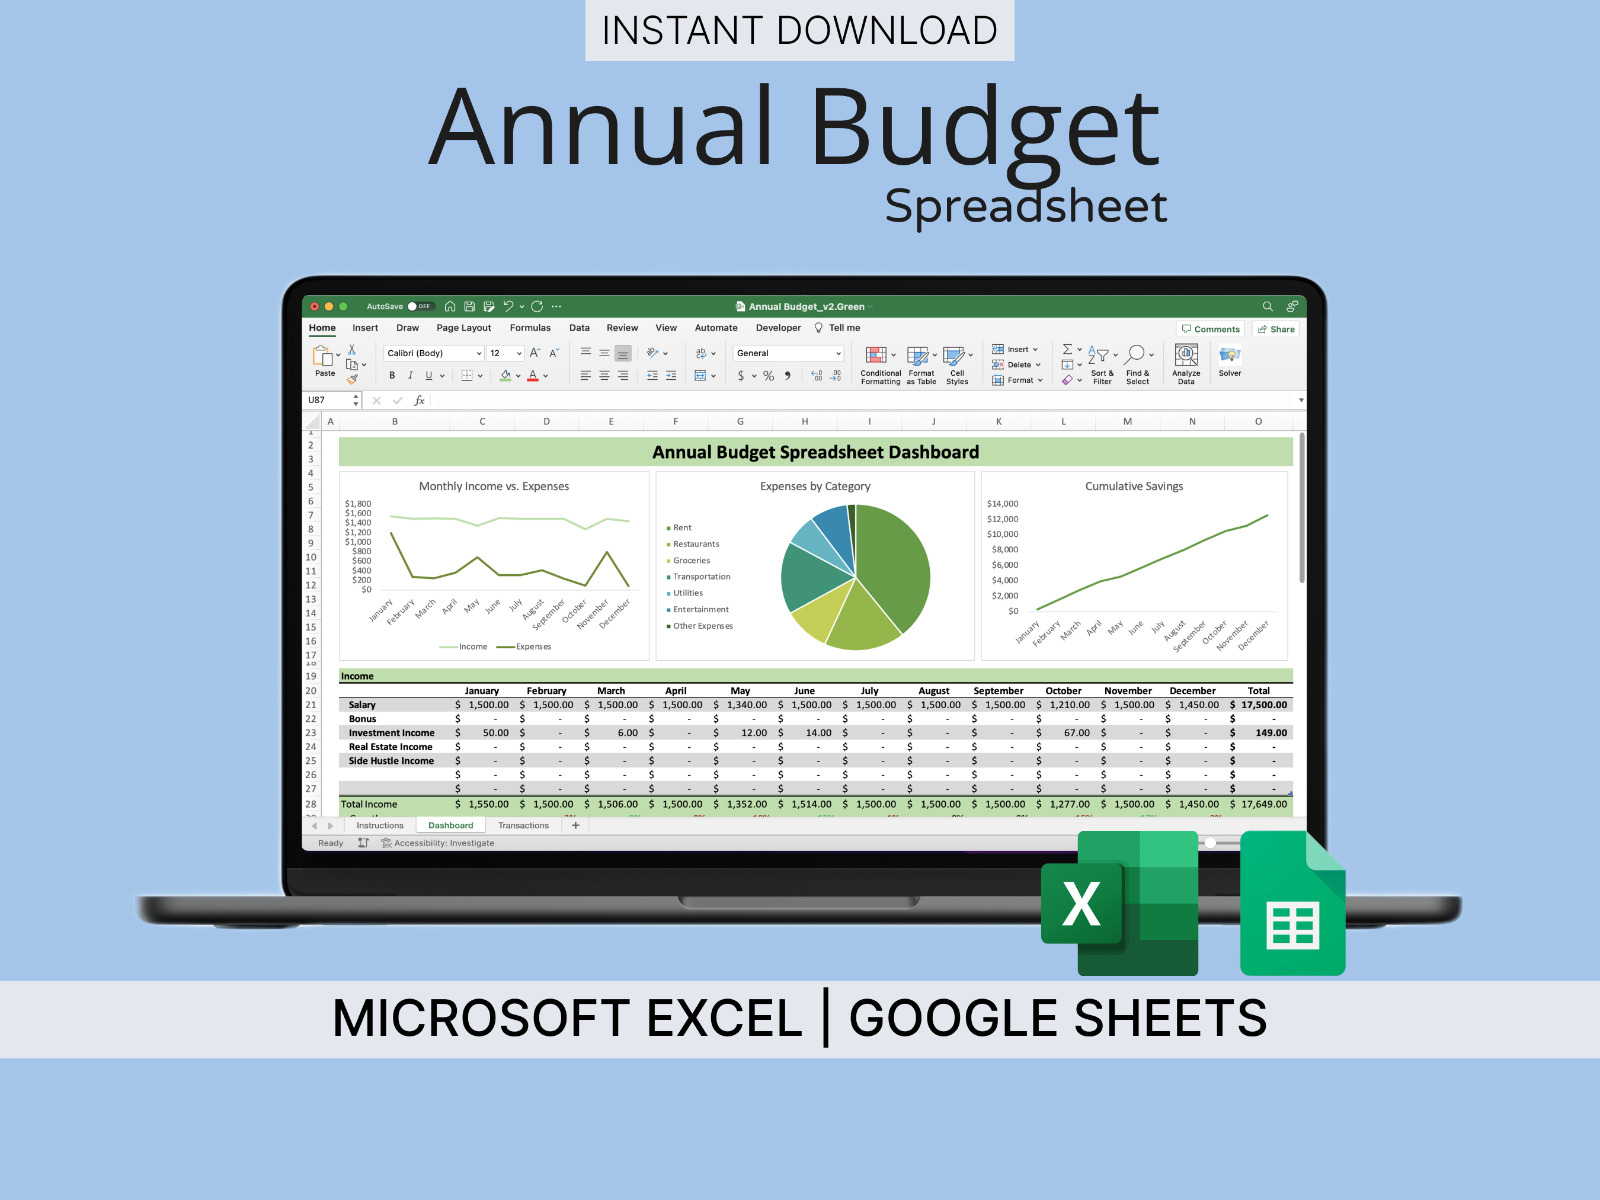 Budget Spreadsheet for Microsoft Excel & Google Sheets (Green) - Track Finances